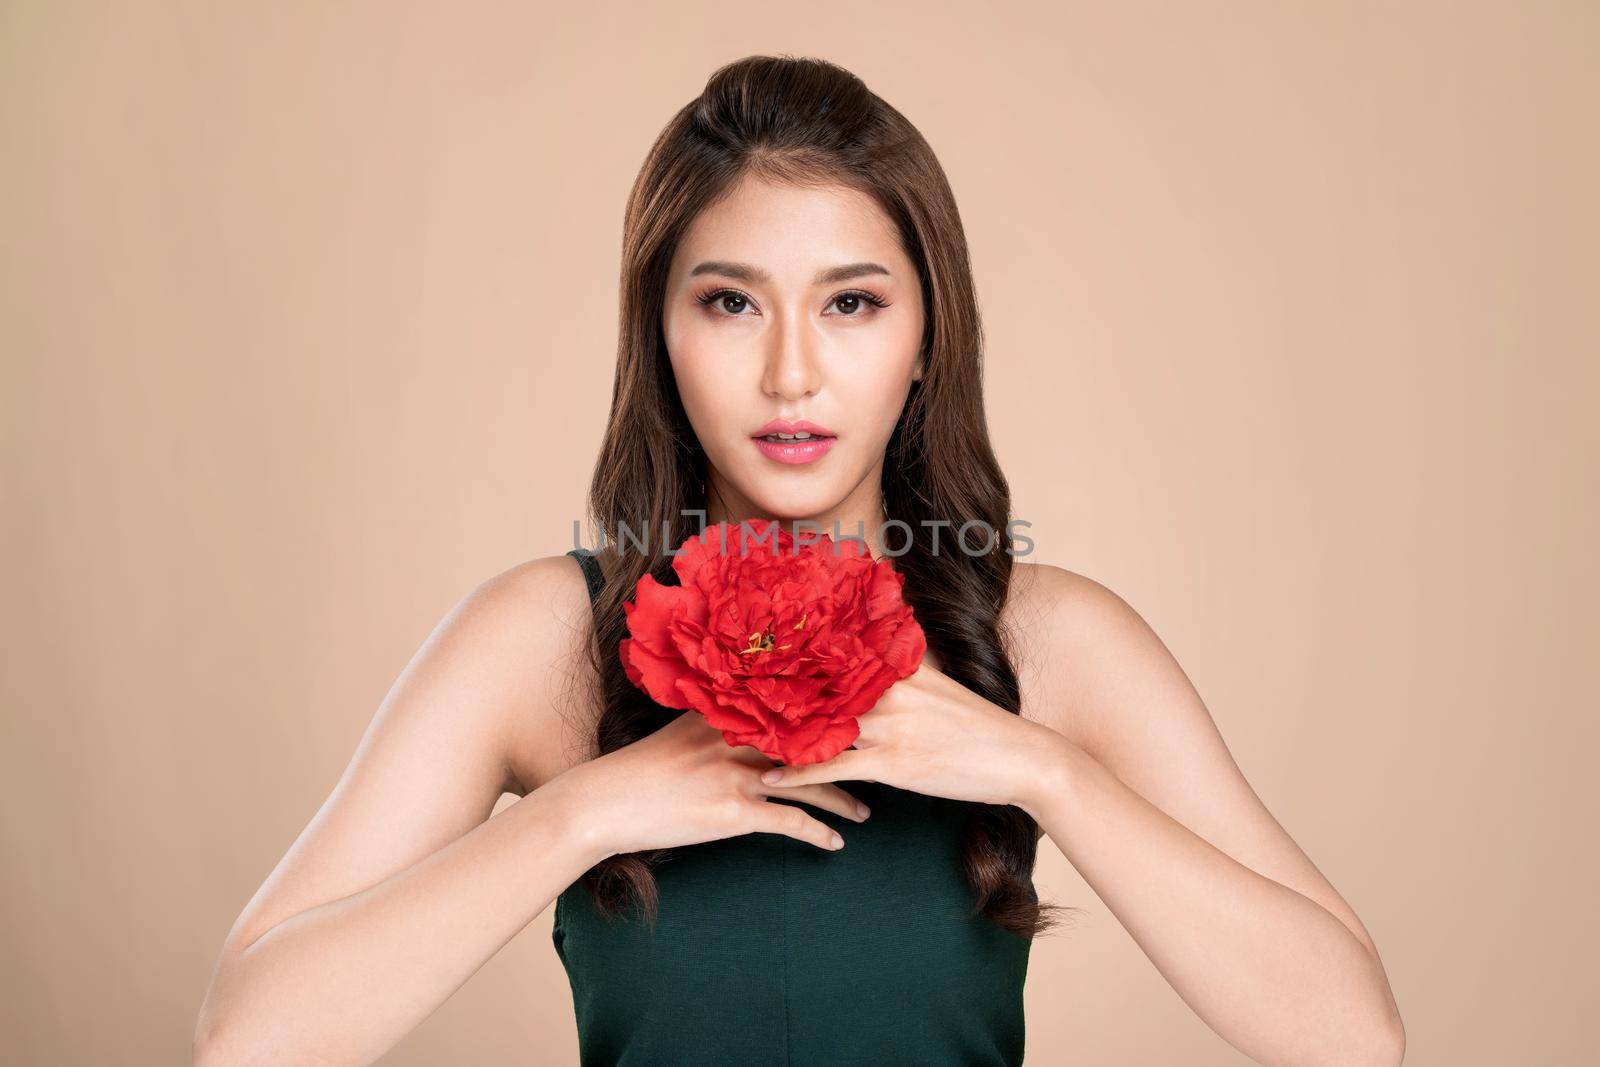 Ardent female model with flawless fair skin and perfect makeup holding flowers. Woman receive flowers, white background.